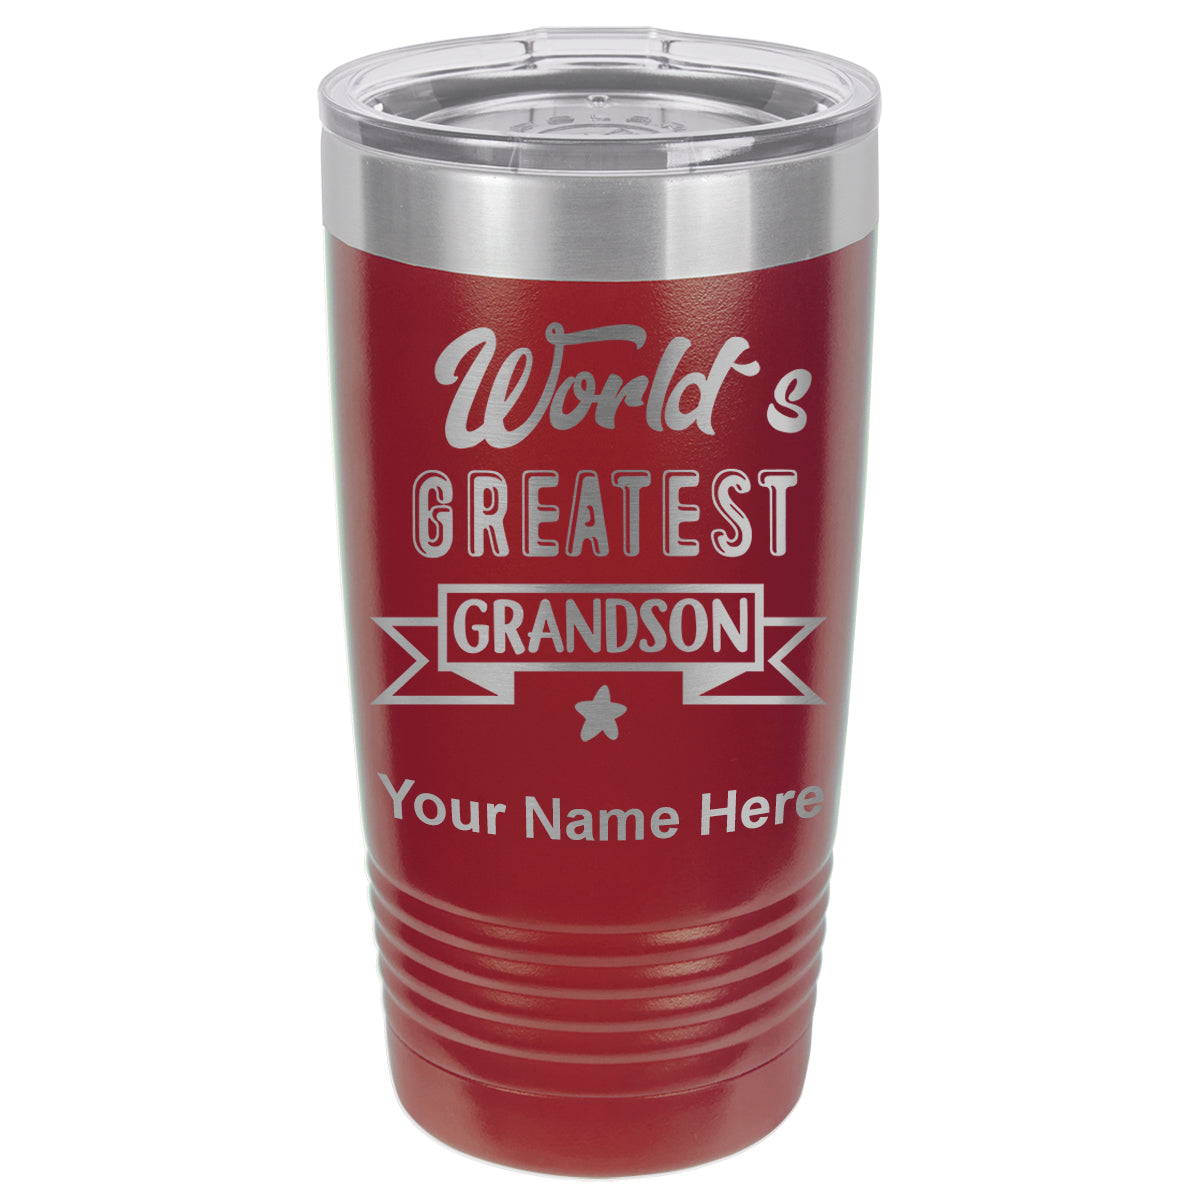 20oz Vacuum Insulated Tumbler Mug, World's Greatest Grandson, Personalized Engraving Included